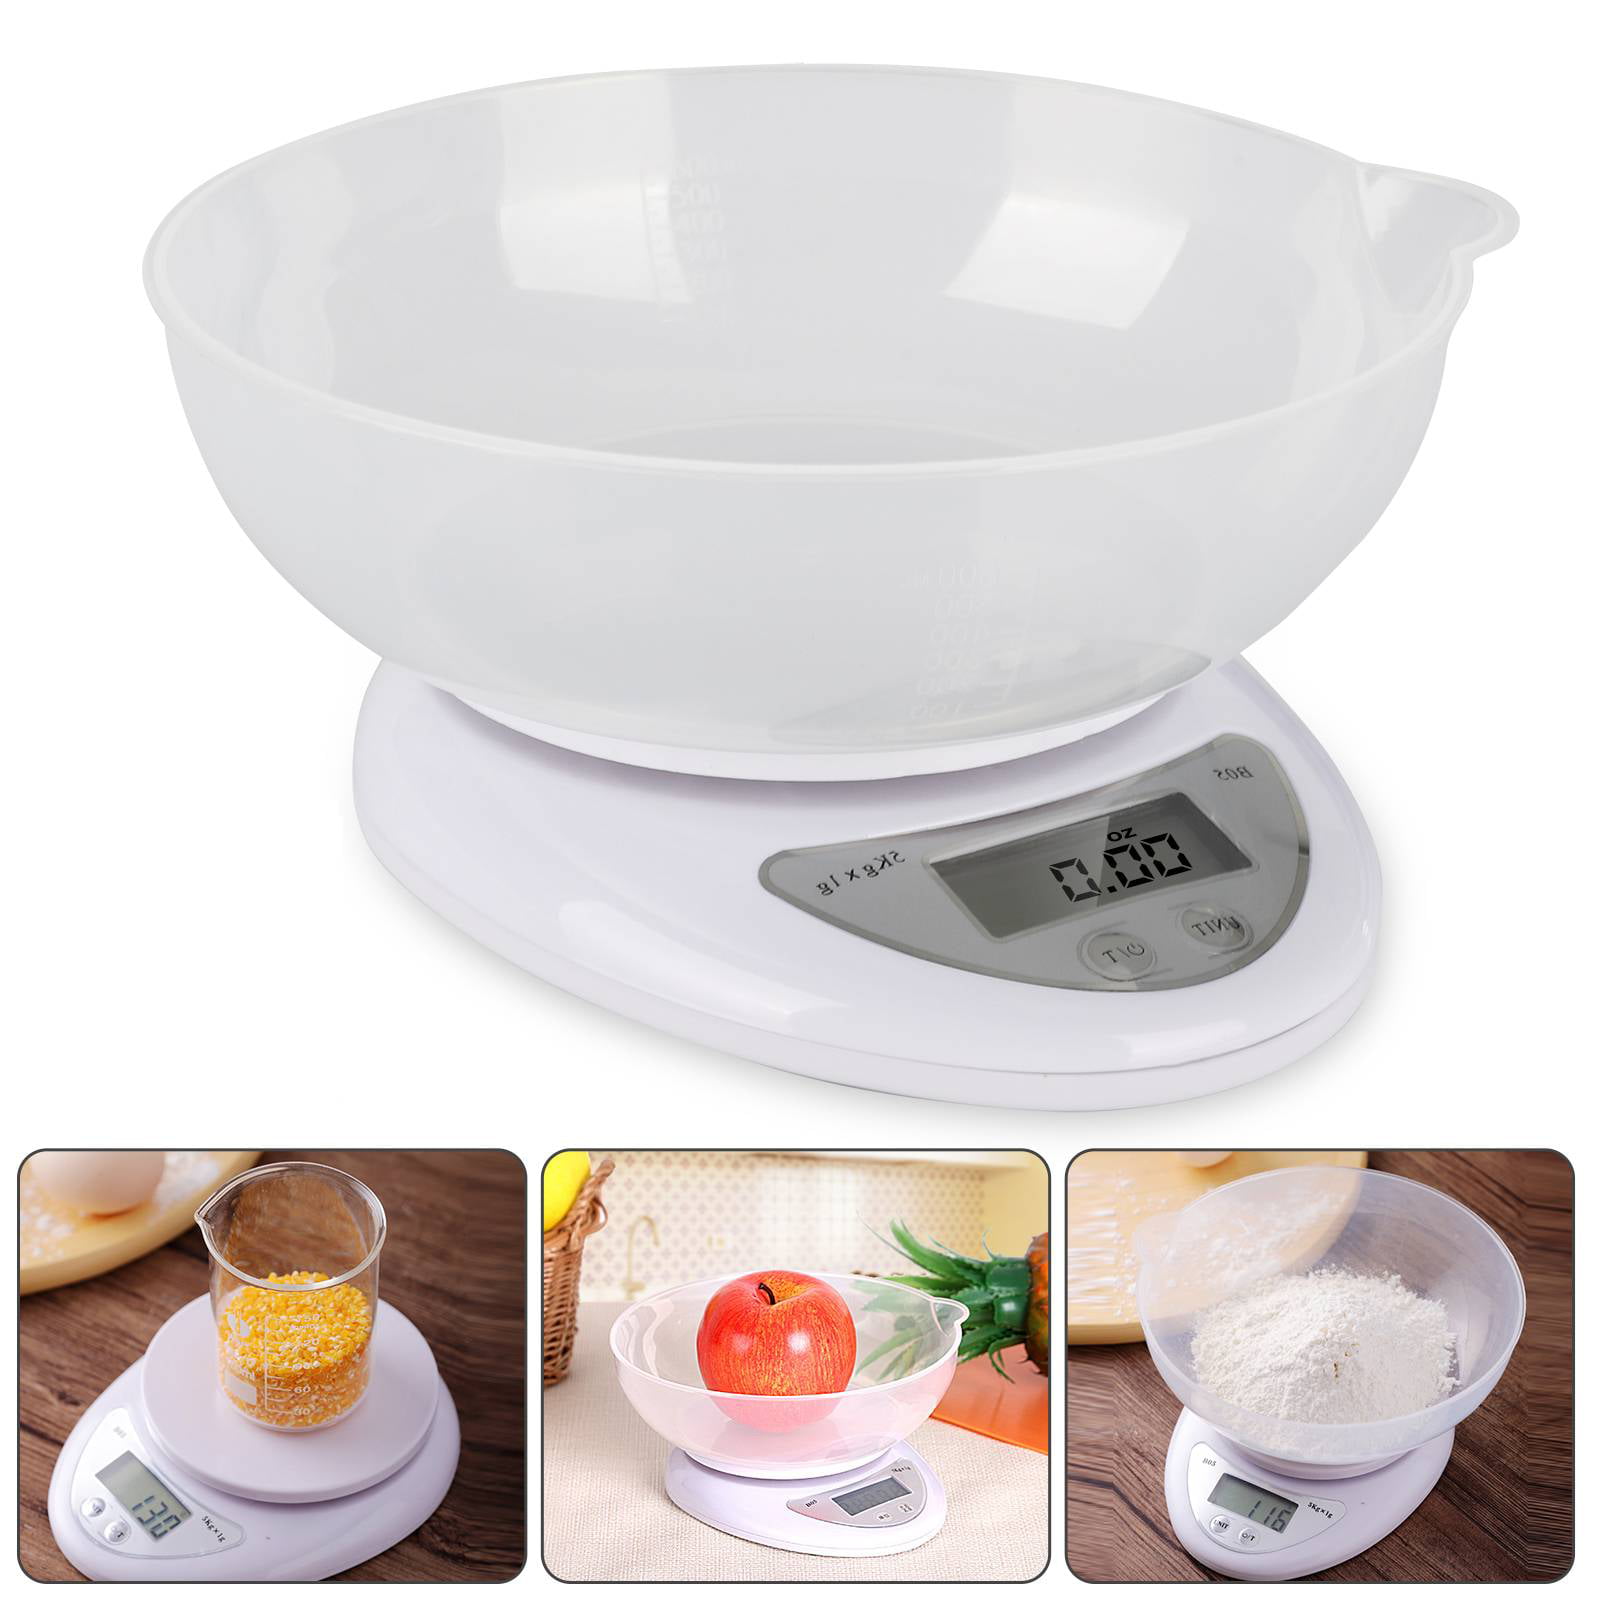 Kitchen Scale Modern Style Digital colorful design ABS plastic Electronic Kitchen Scale 5kg/1g 